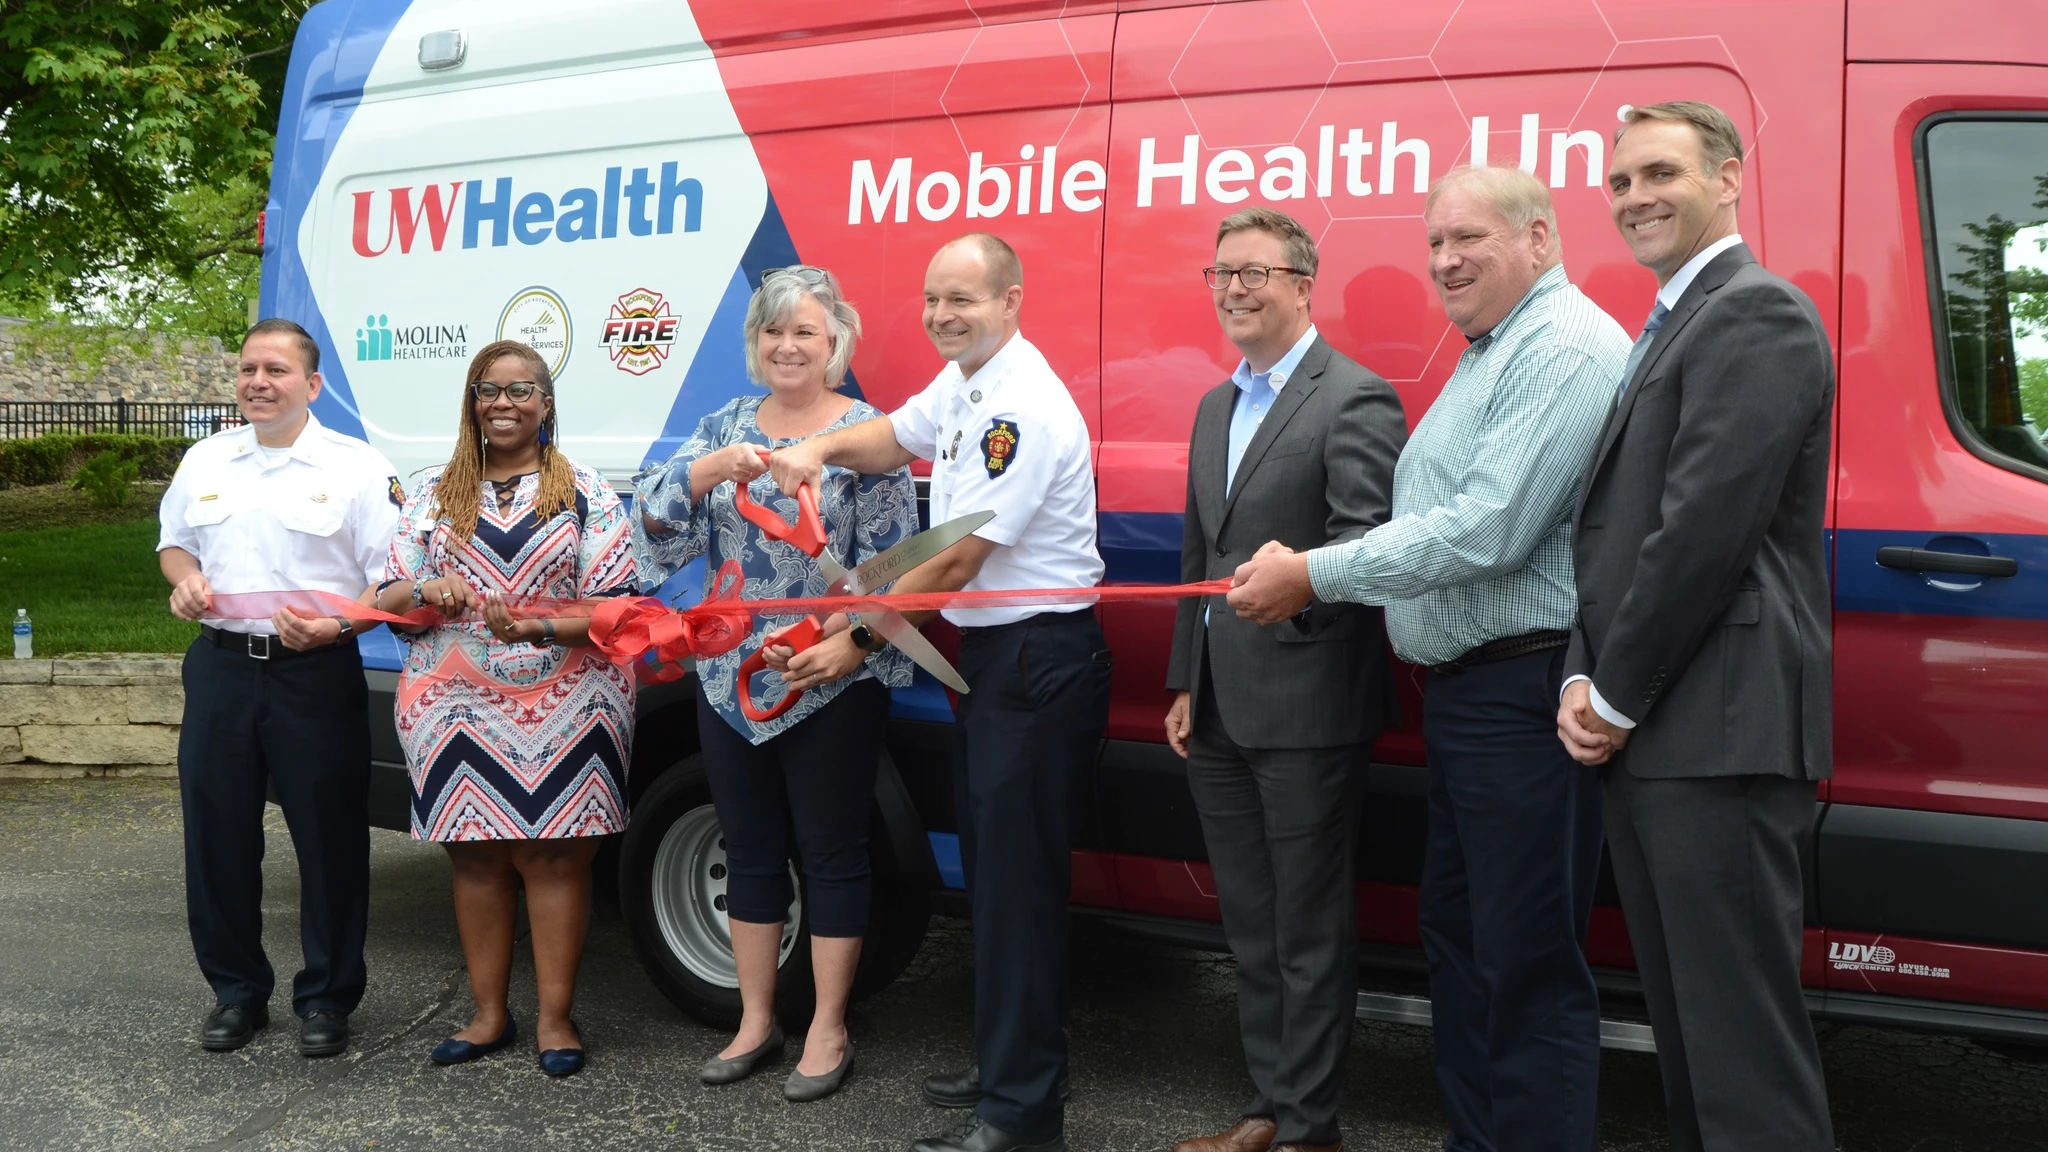 Seven people in front of Mobile Health Unit at ribbon cutting.